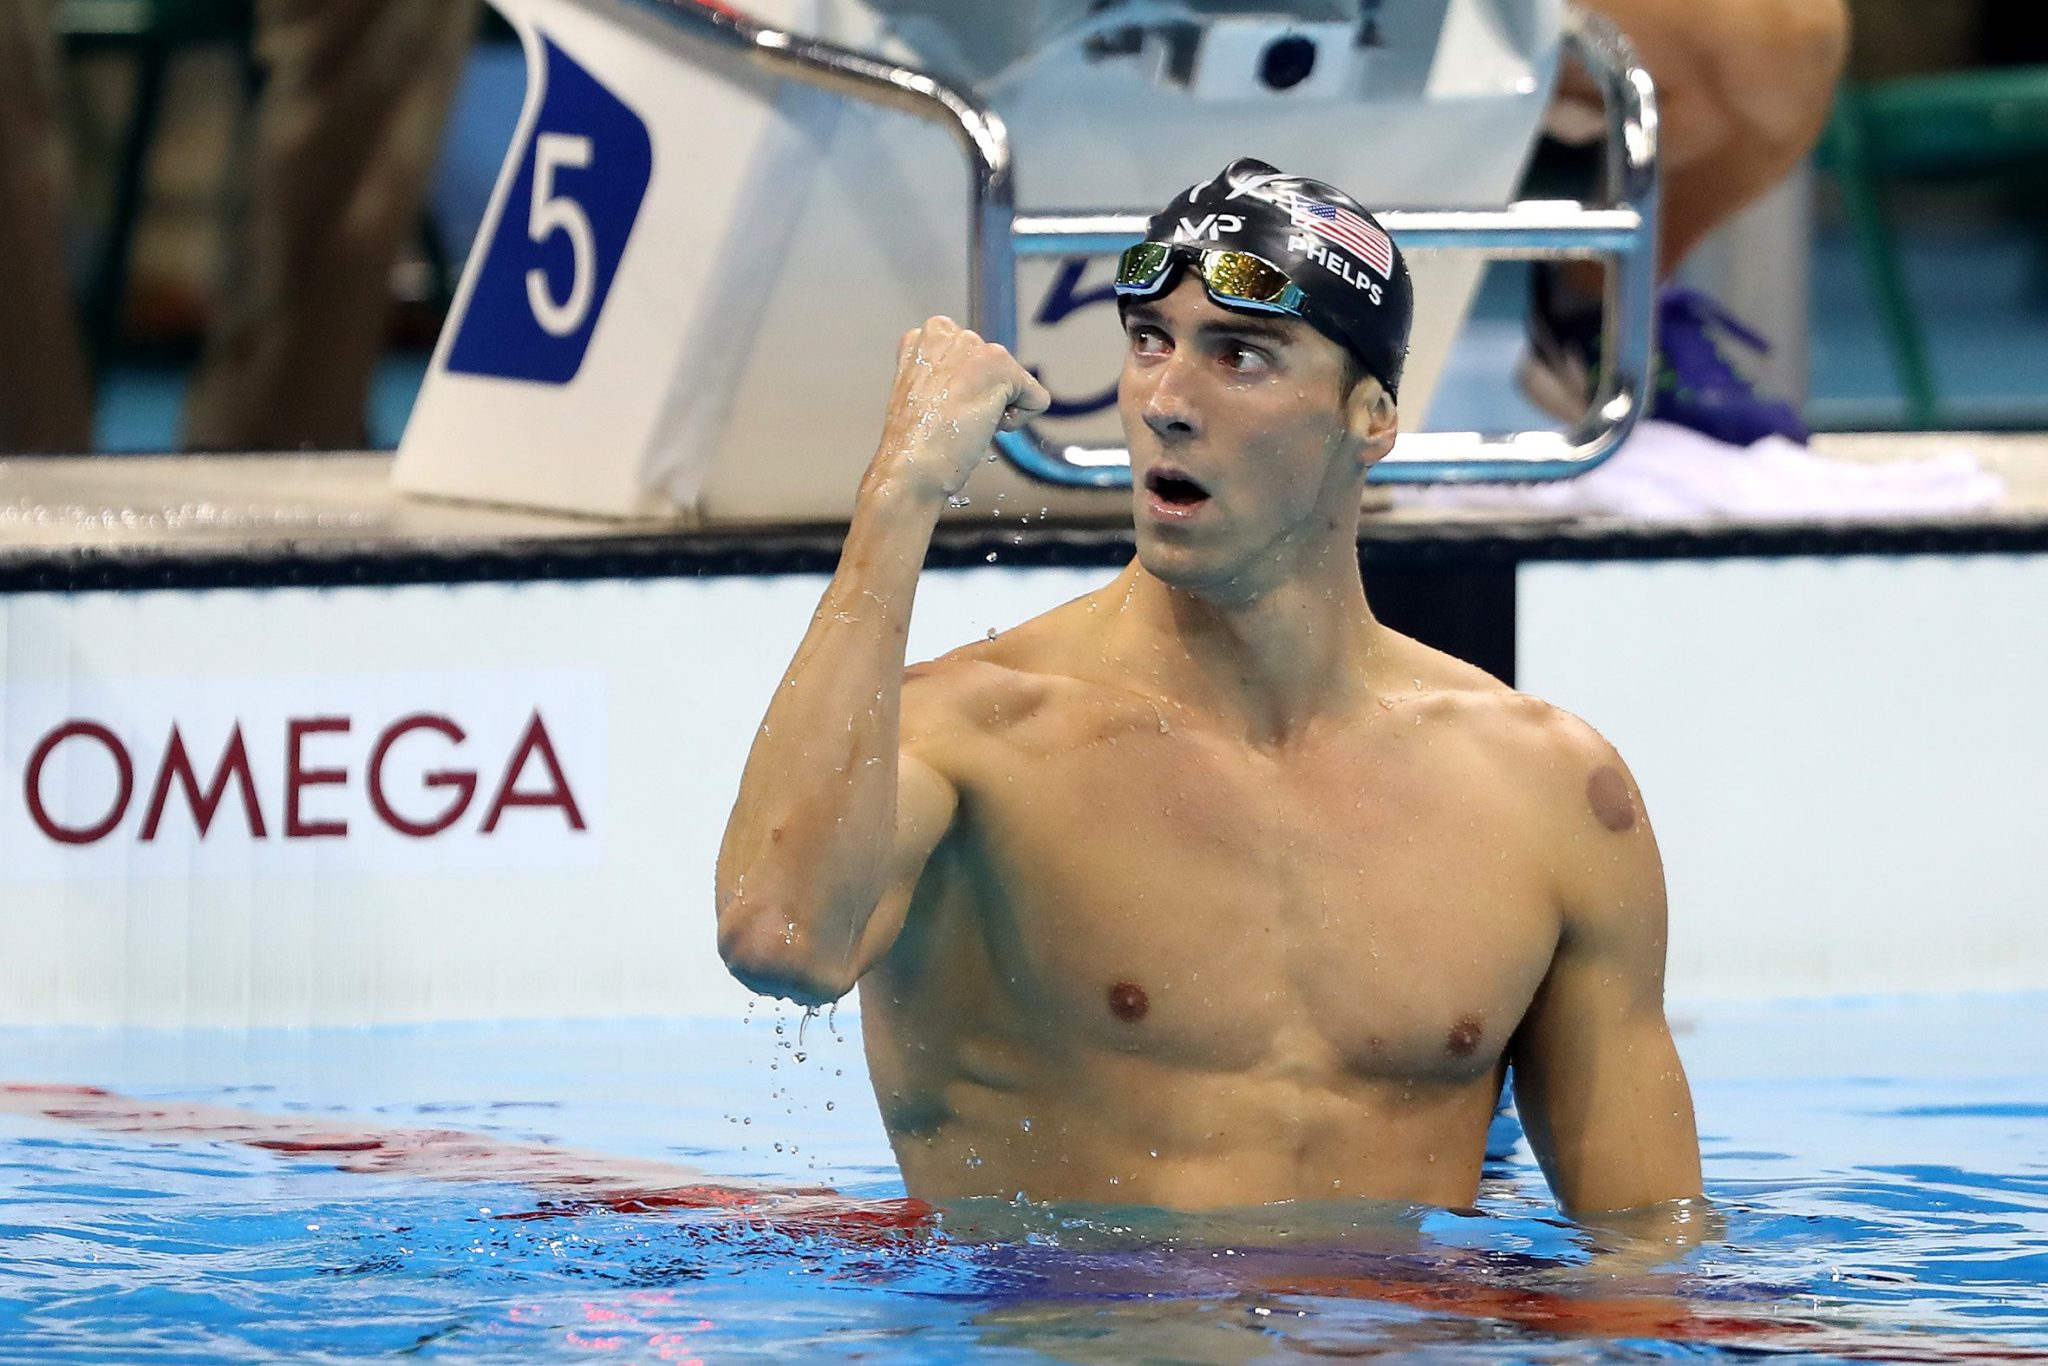 Which Olympic Games did Michael Phelps announce his retirement?